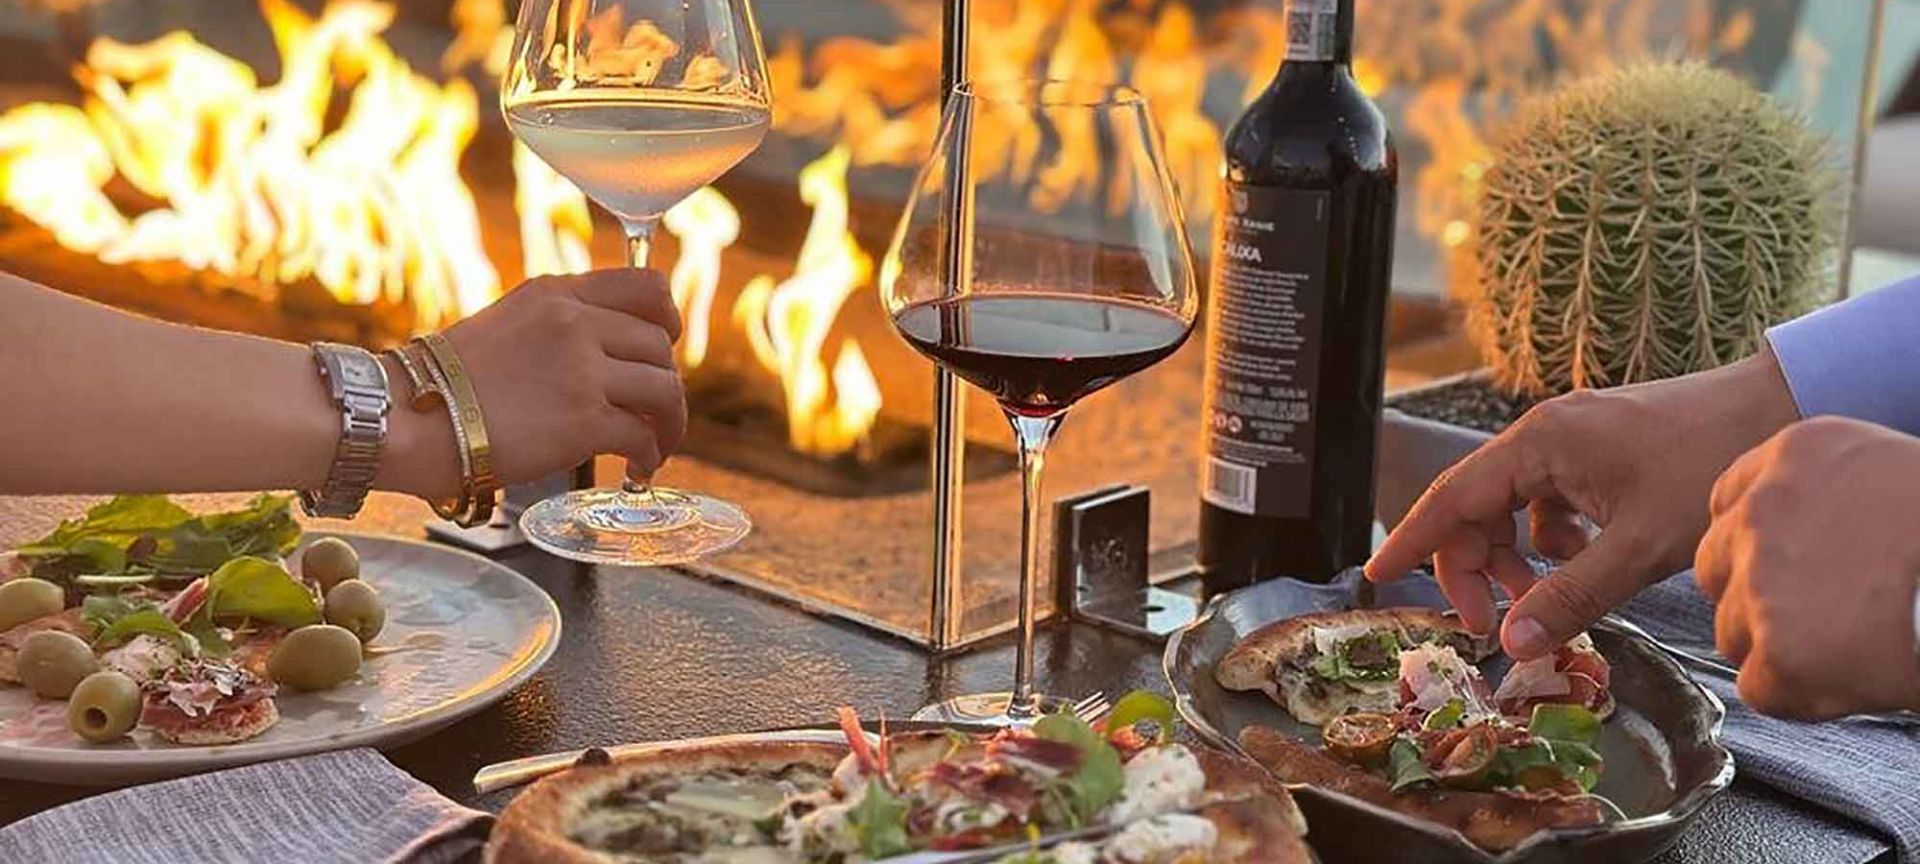 People Are Eating Pizza And Drinking Wine